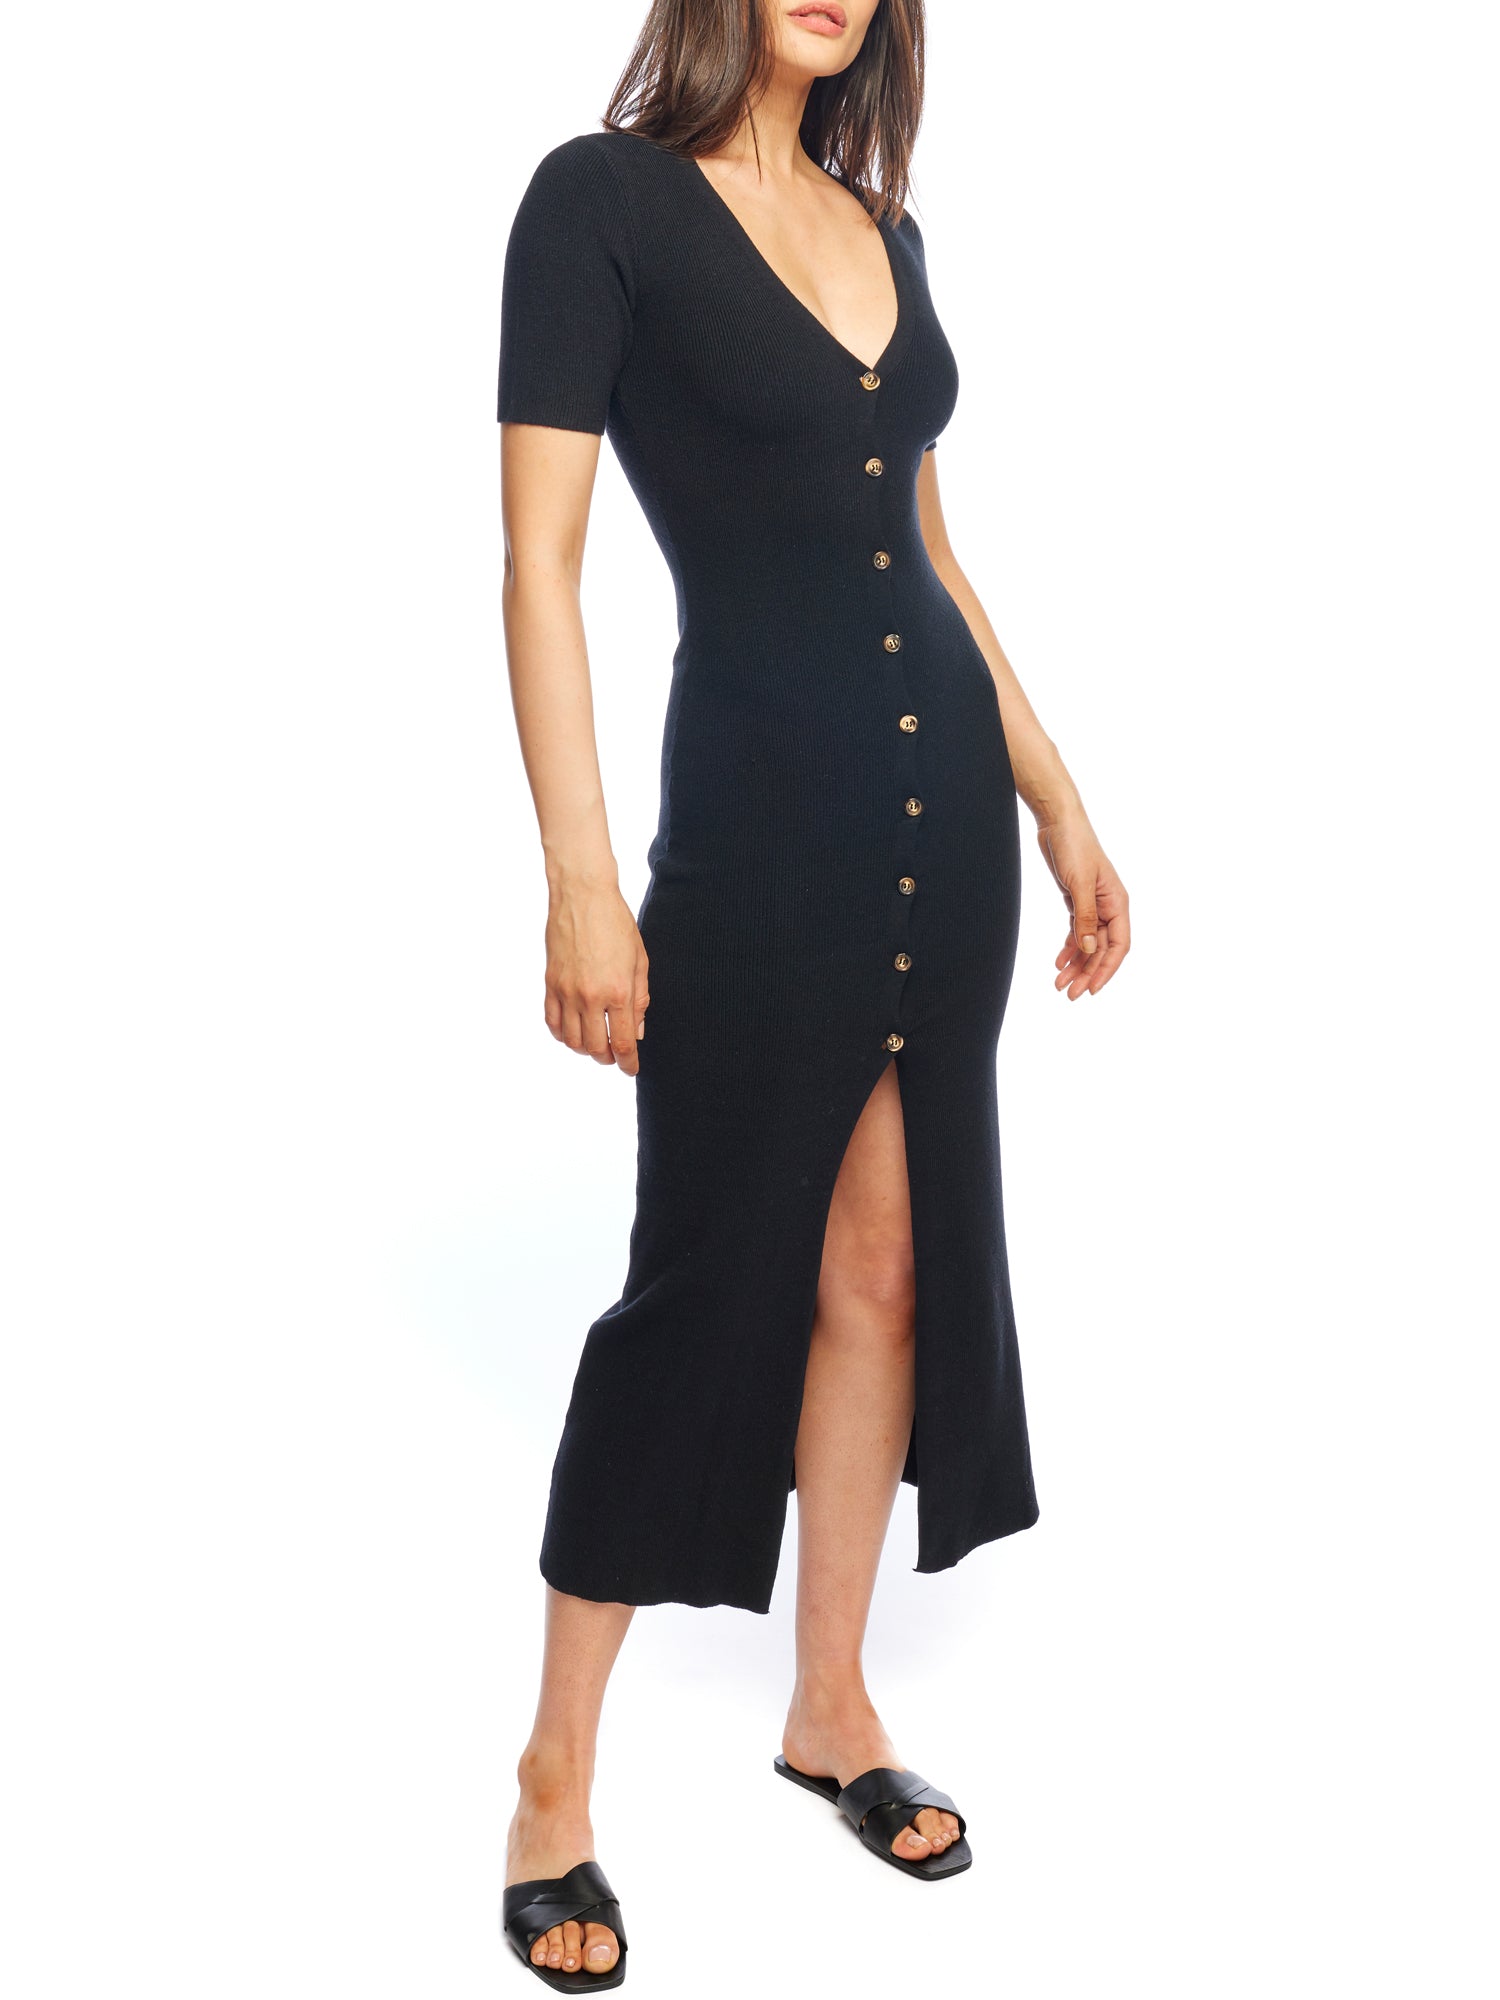 short sleeve, button down midi dress with a deep V-neck and figure hugging fit in black